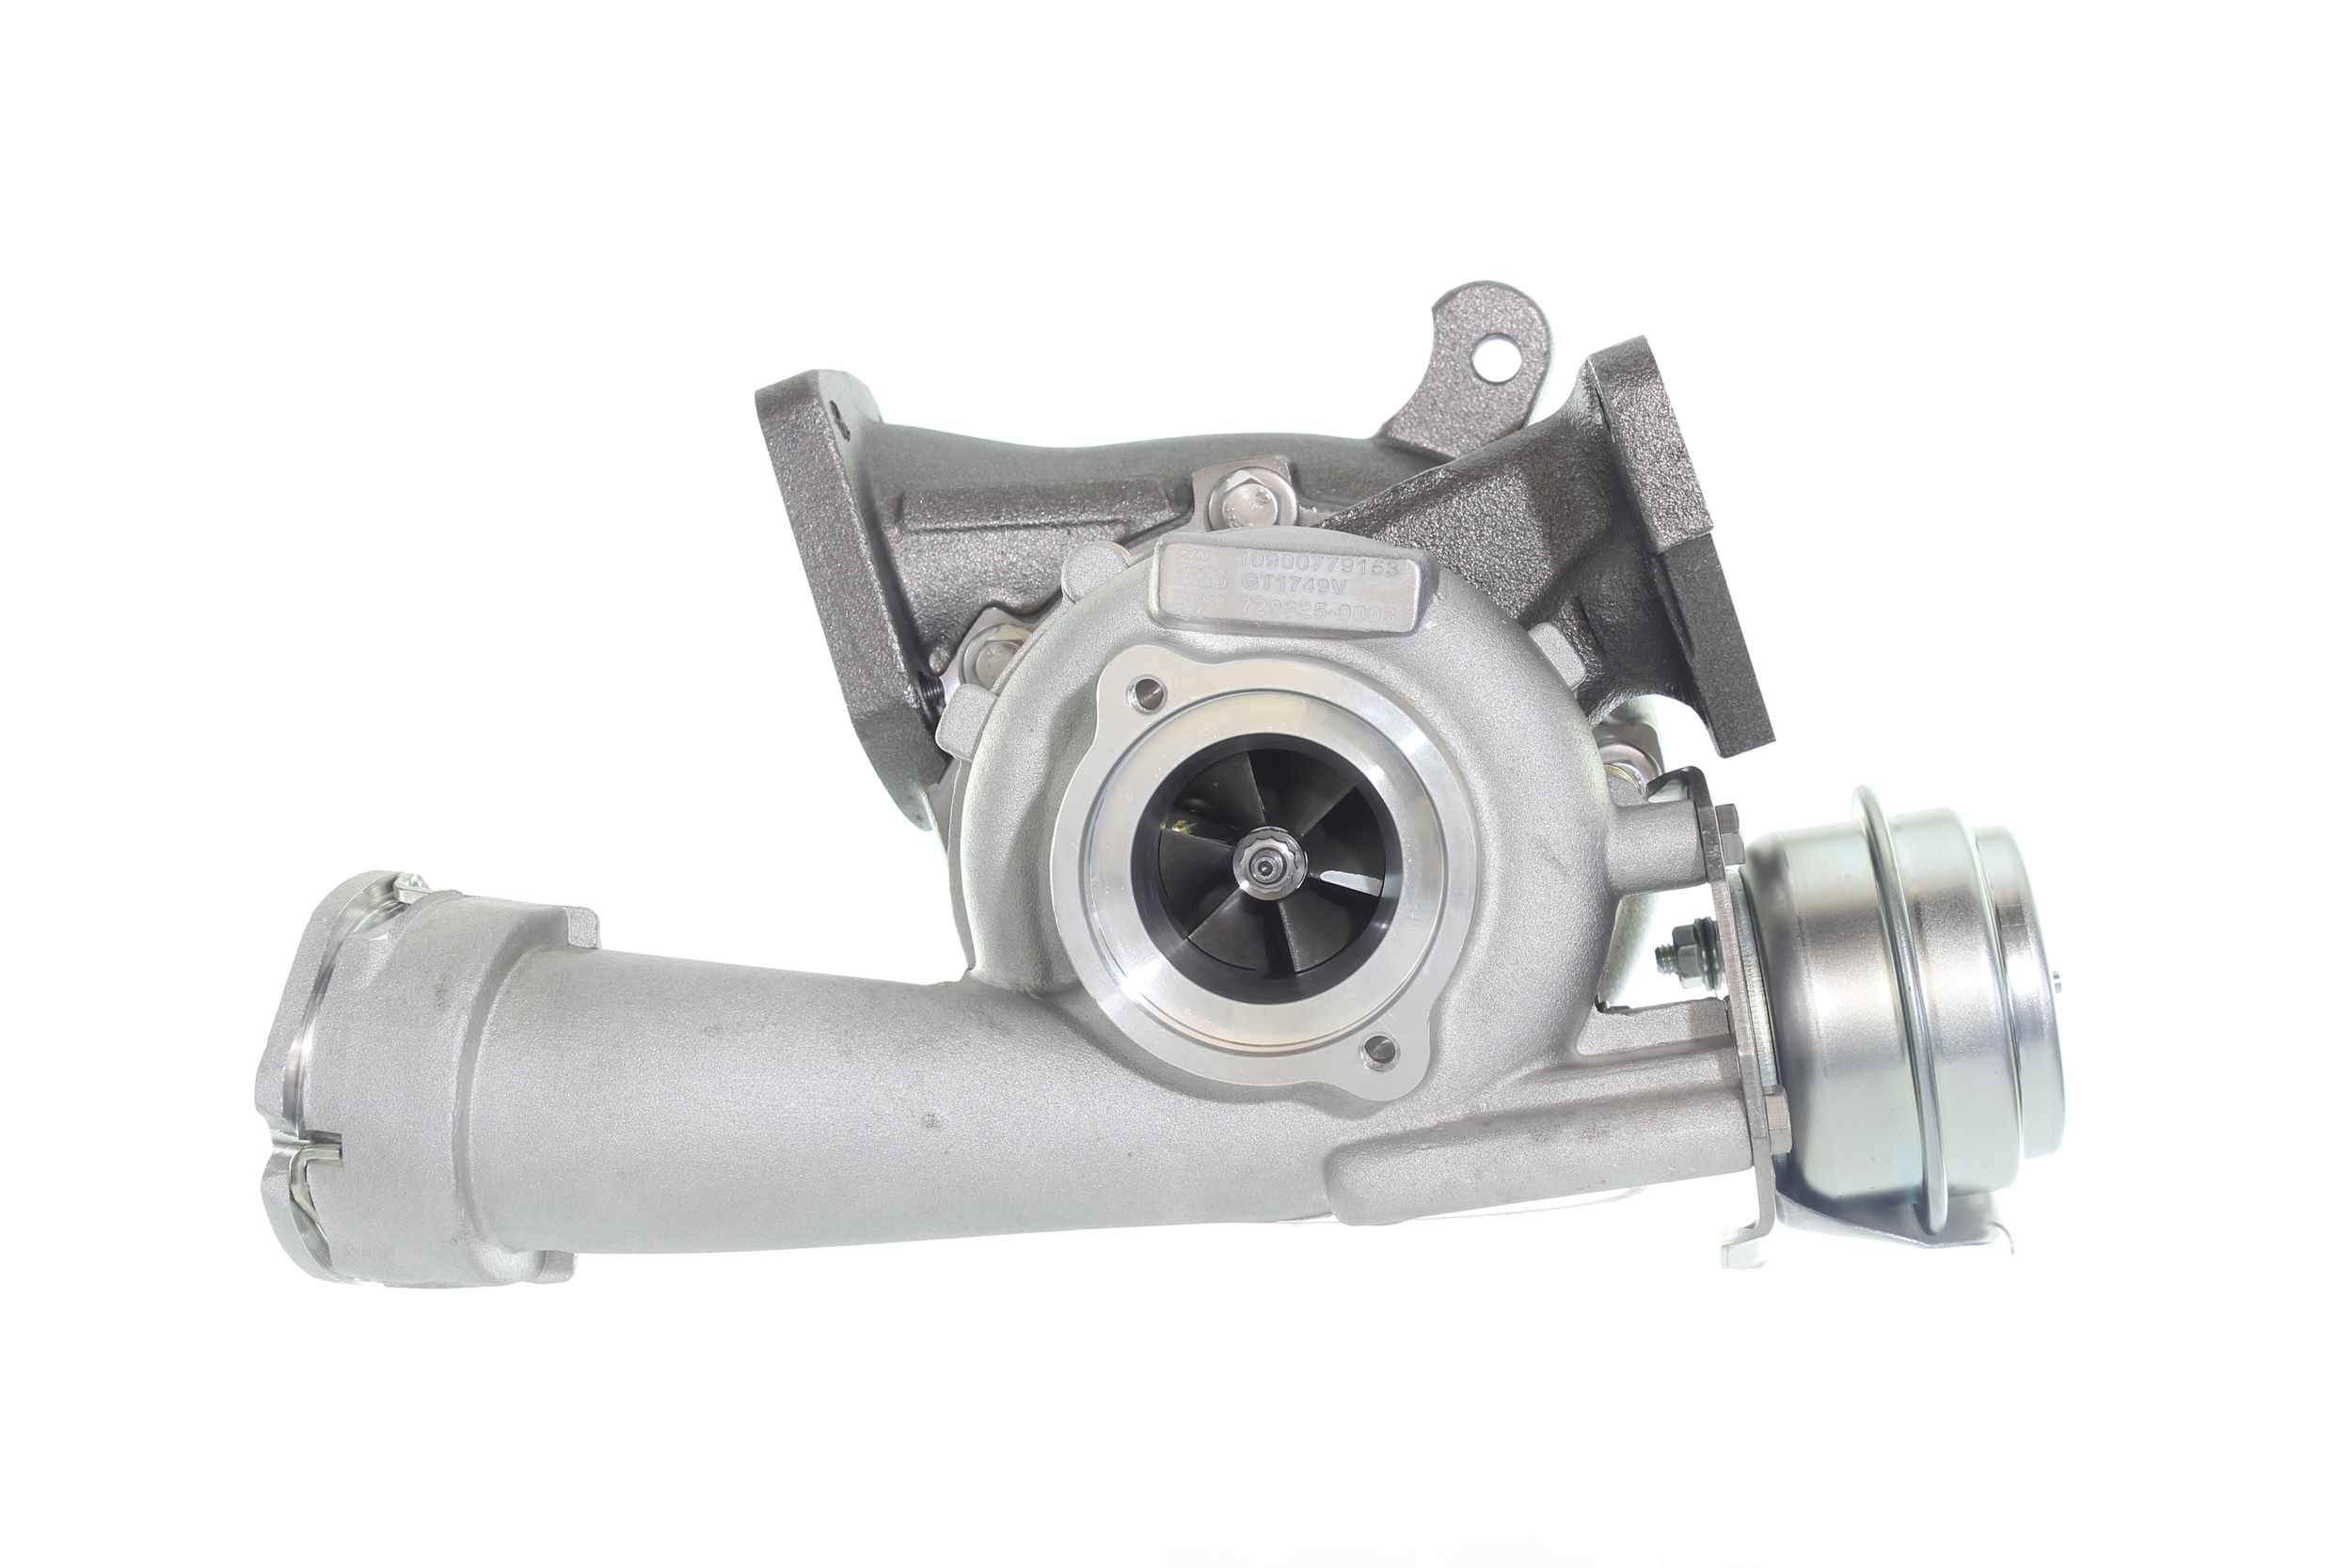 ALANKO 10900779 Turbocharger Exhaust Turbocharger, Euro 3, Incl. Gasket Set, with attachment material